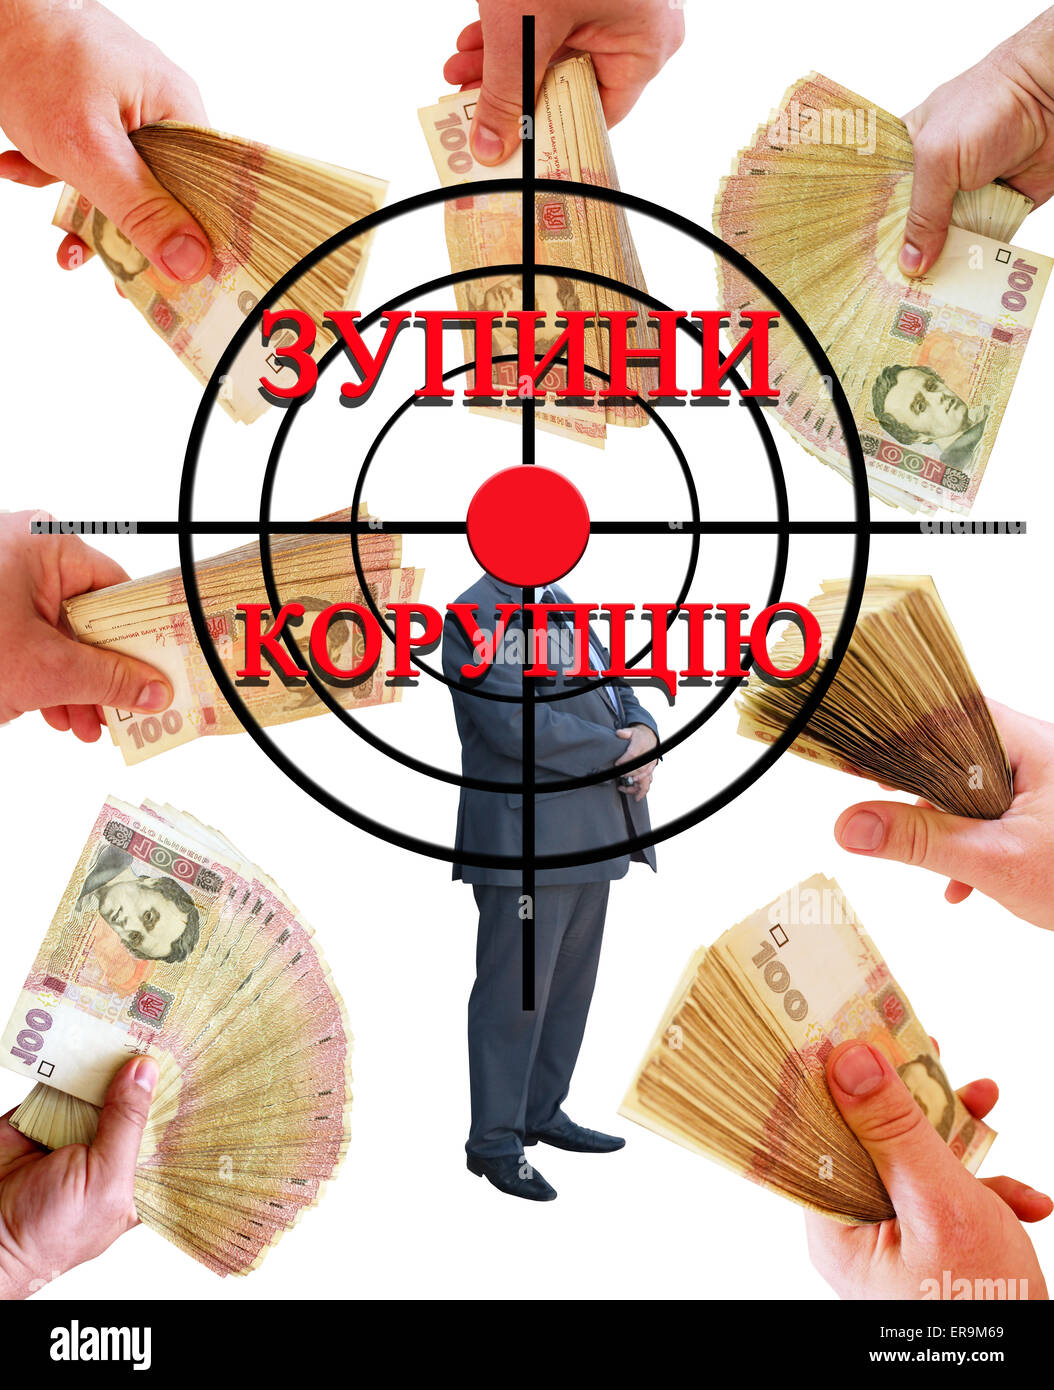 appeal stop corruption in Ukrainian with target and money as bribe Stock Photo